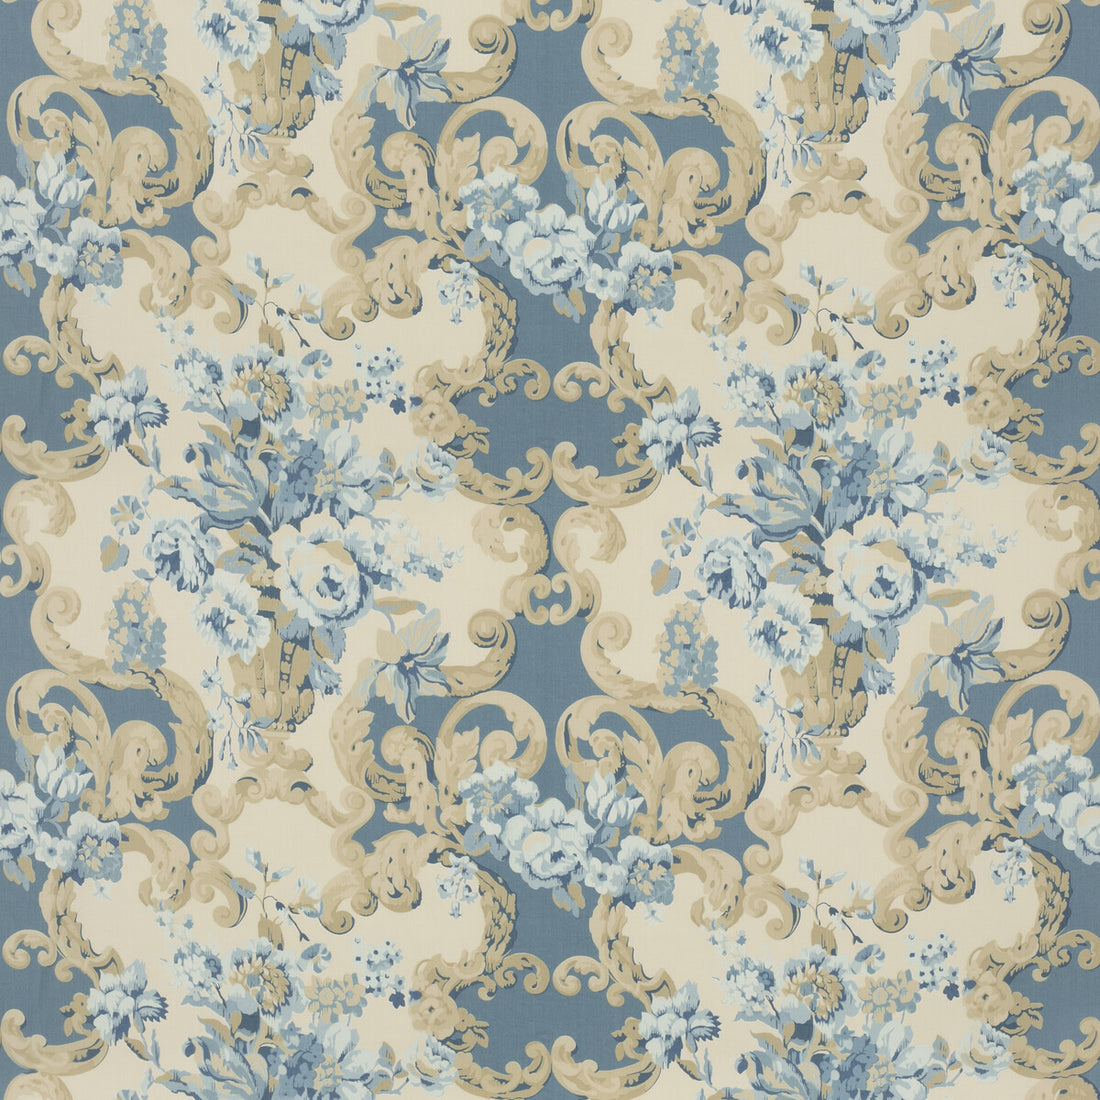 Floral Rococo fabric in blue color - pattern FD2011.H101.0 - by Mulberry in the Icons Fabrics collection